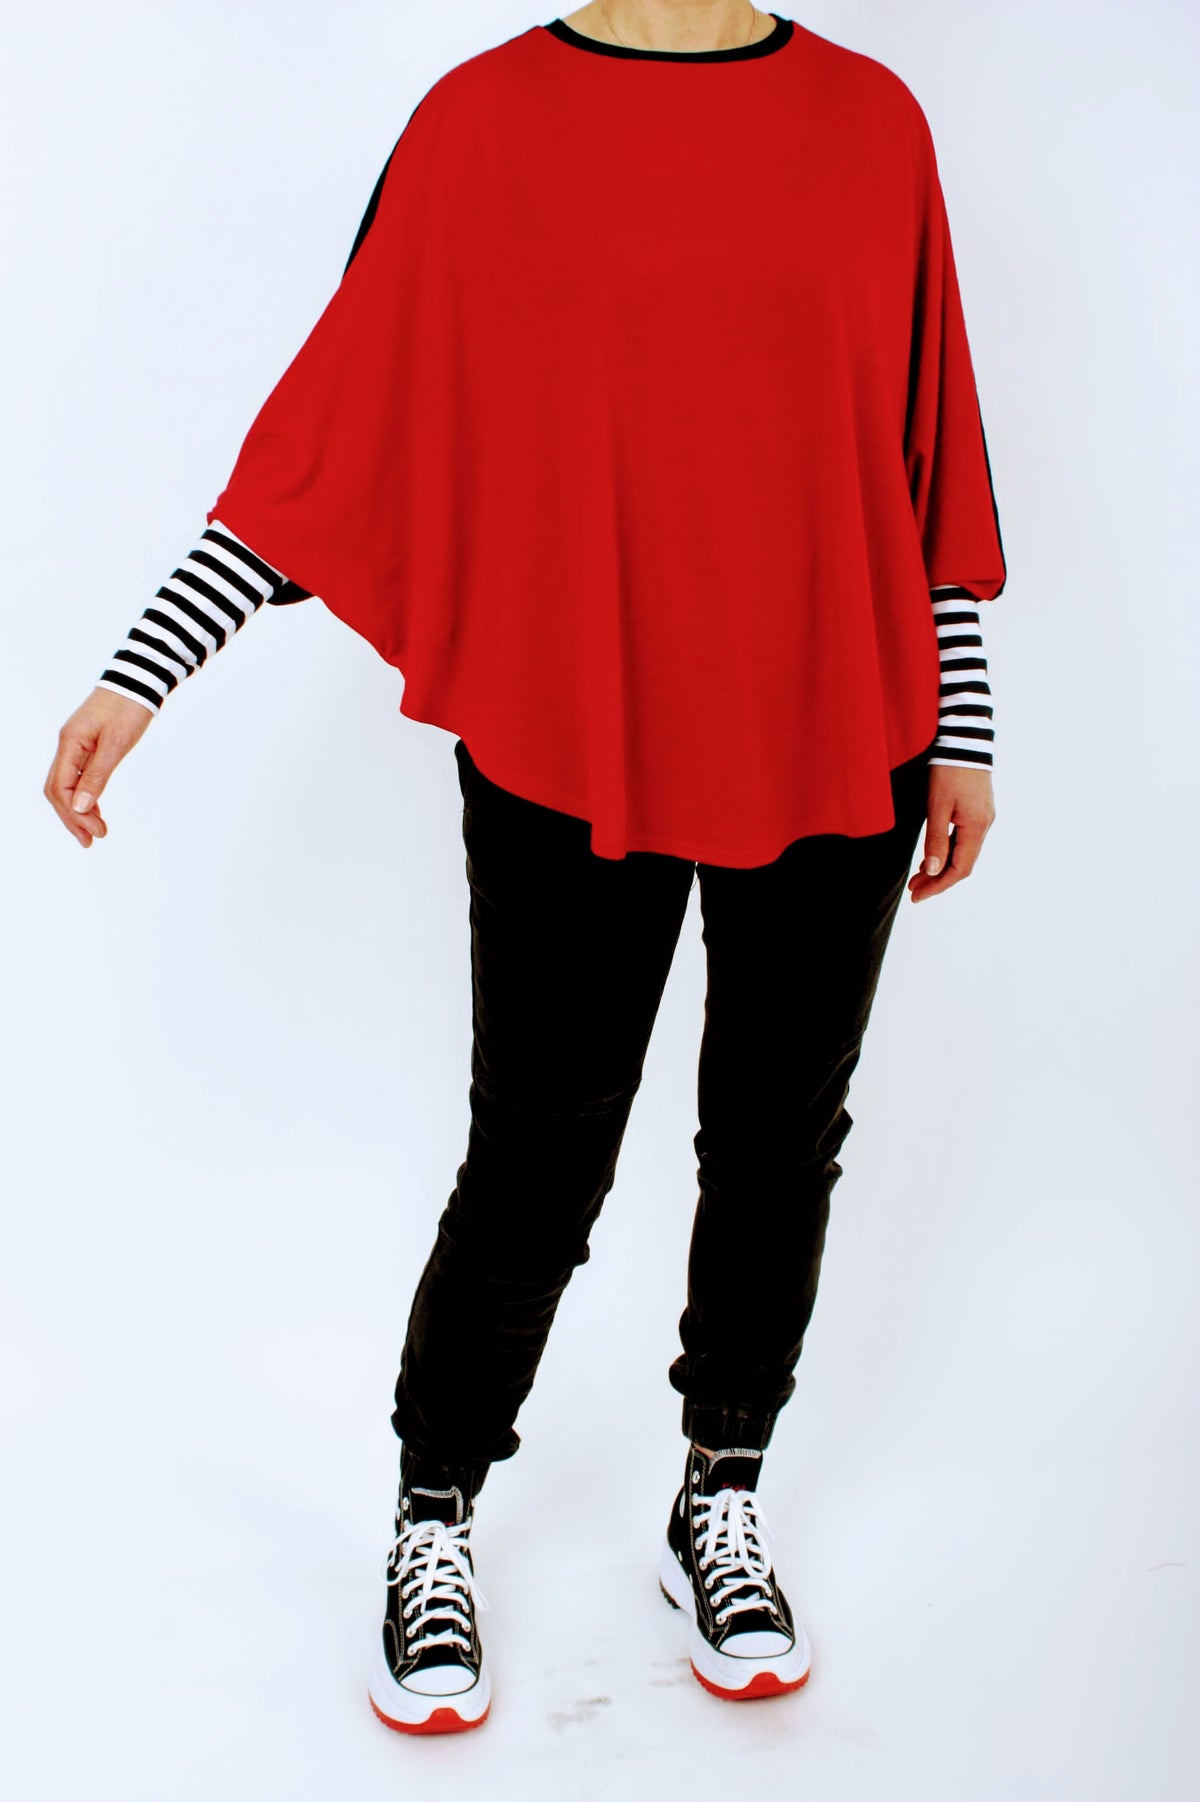 Poncho Merino Reversible - Red and Black with Black and White stripe Cuff - Pre Order 2 - 3 Weeks